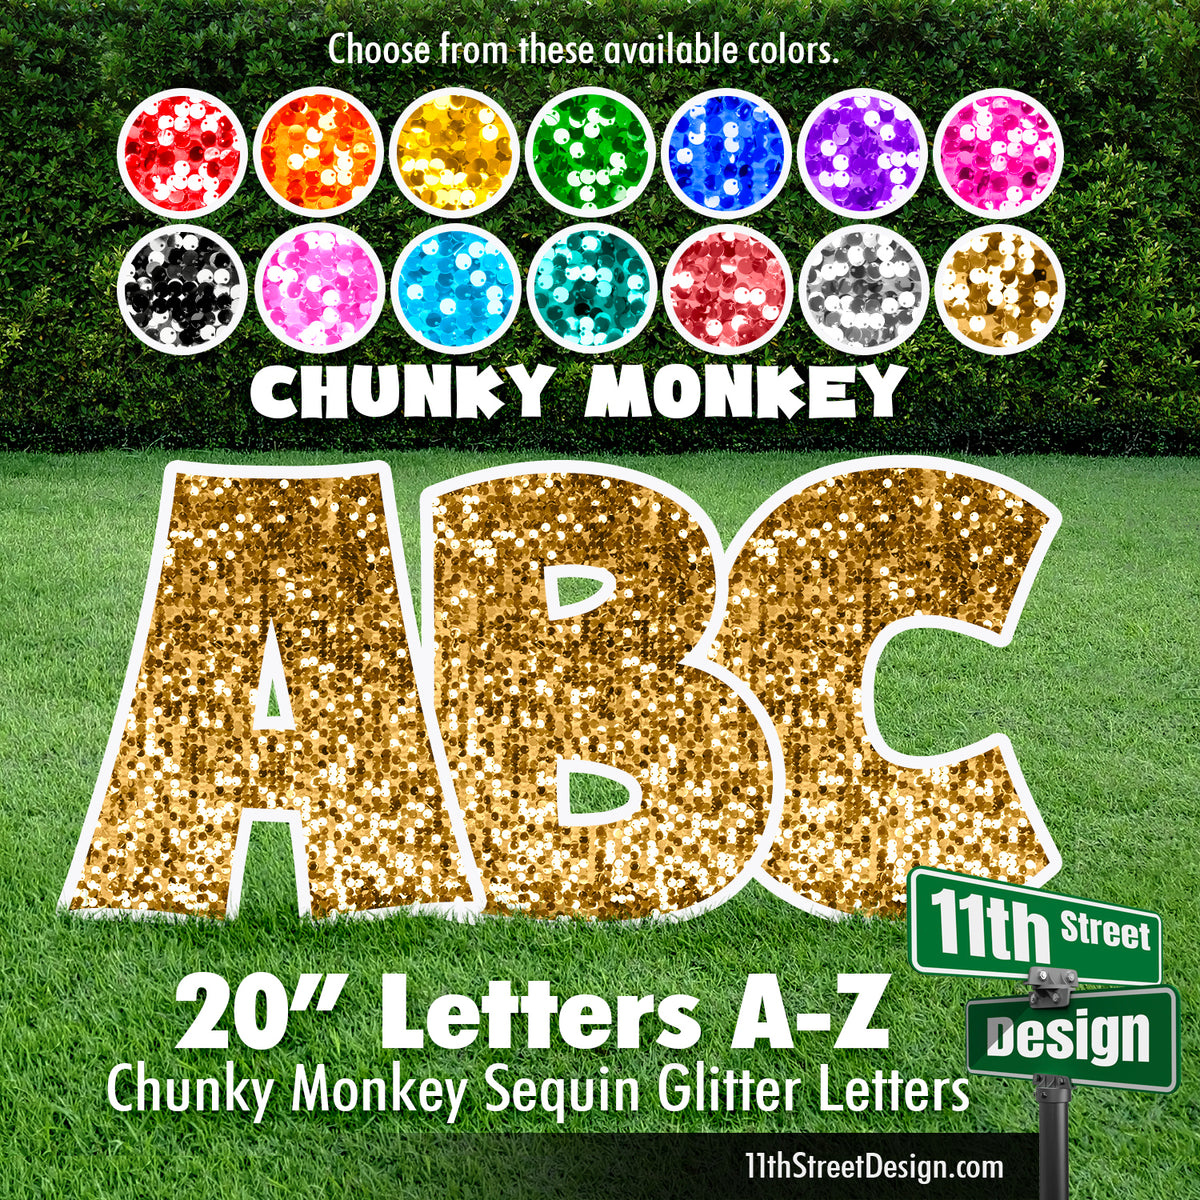 Sequin Glitter 20&quot; Chunky Monkey 26 Letter Alphabet Yard Card Set Includes Letters A-Z